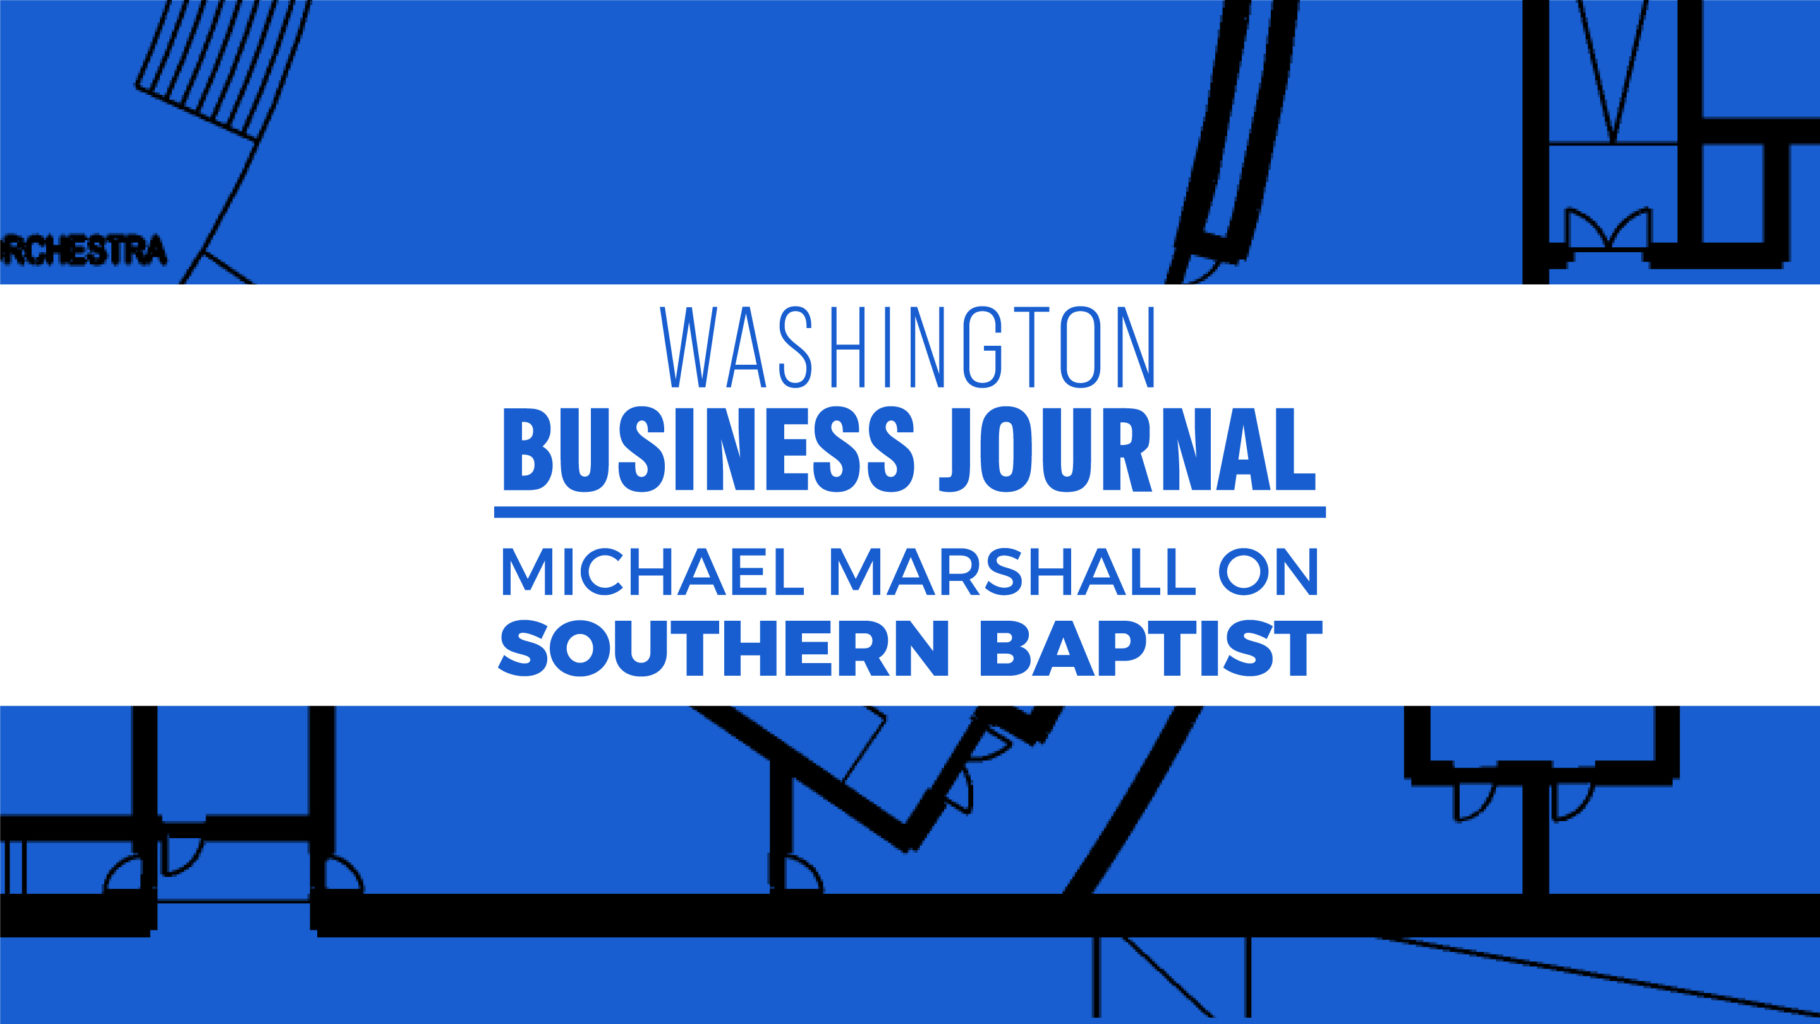 Washington Business Journal Interviews Michael Marshall on Southern Baptist/DMPED Project